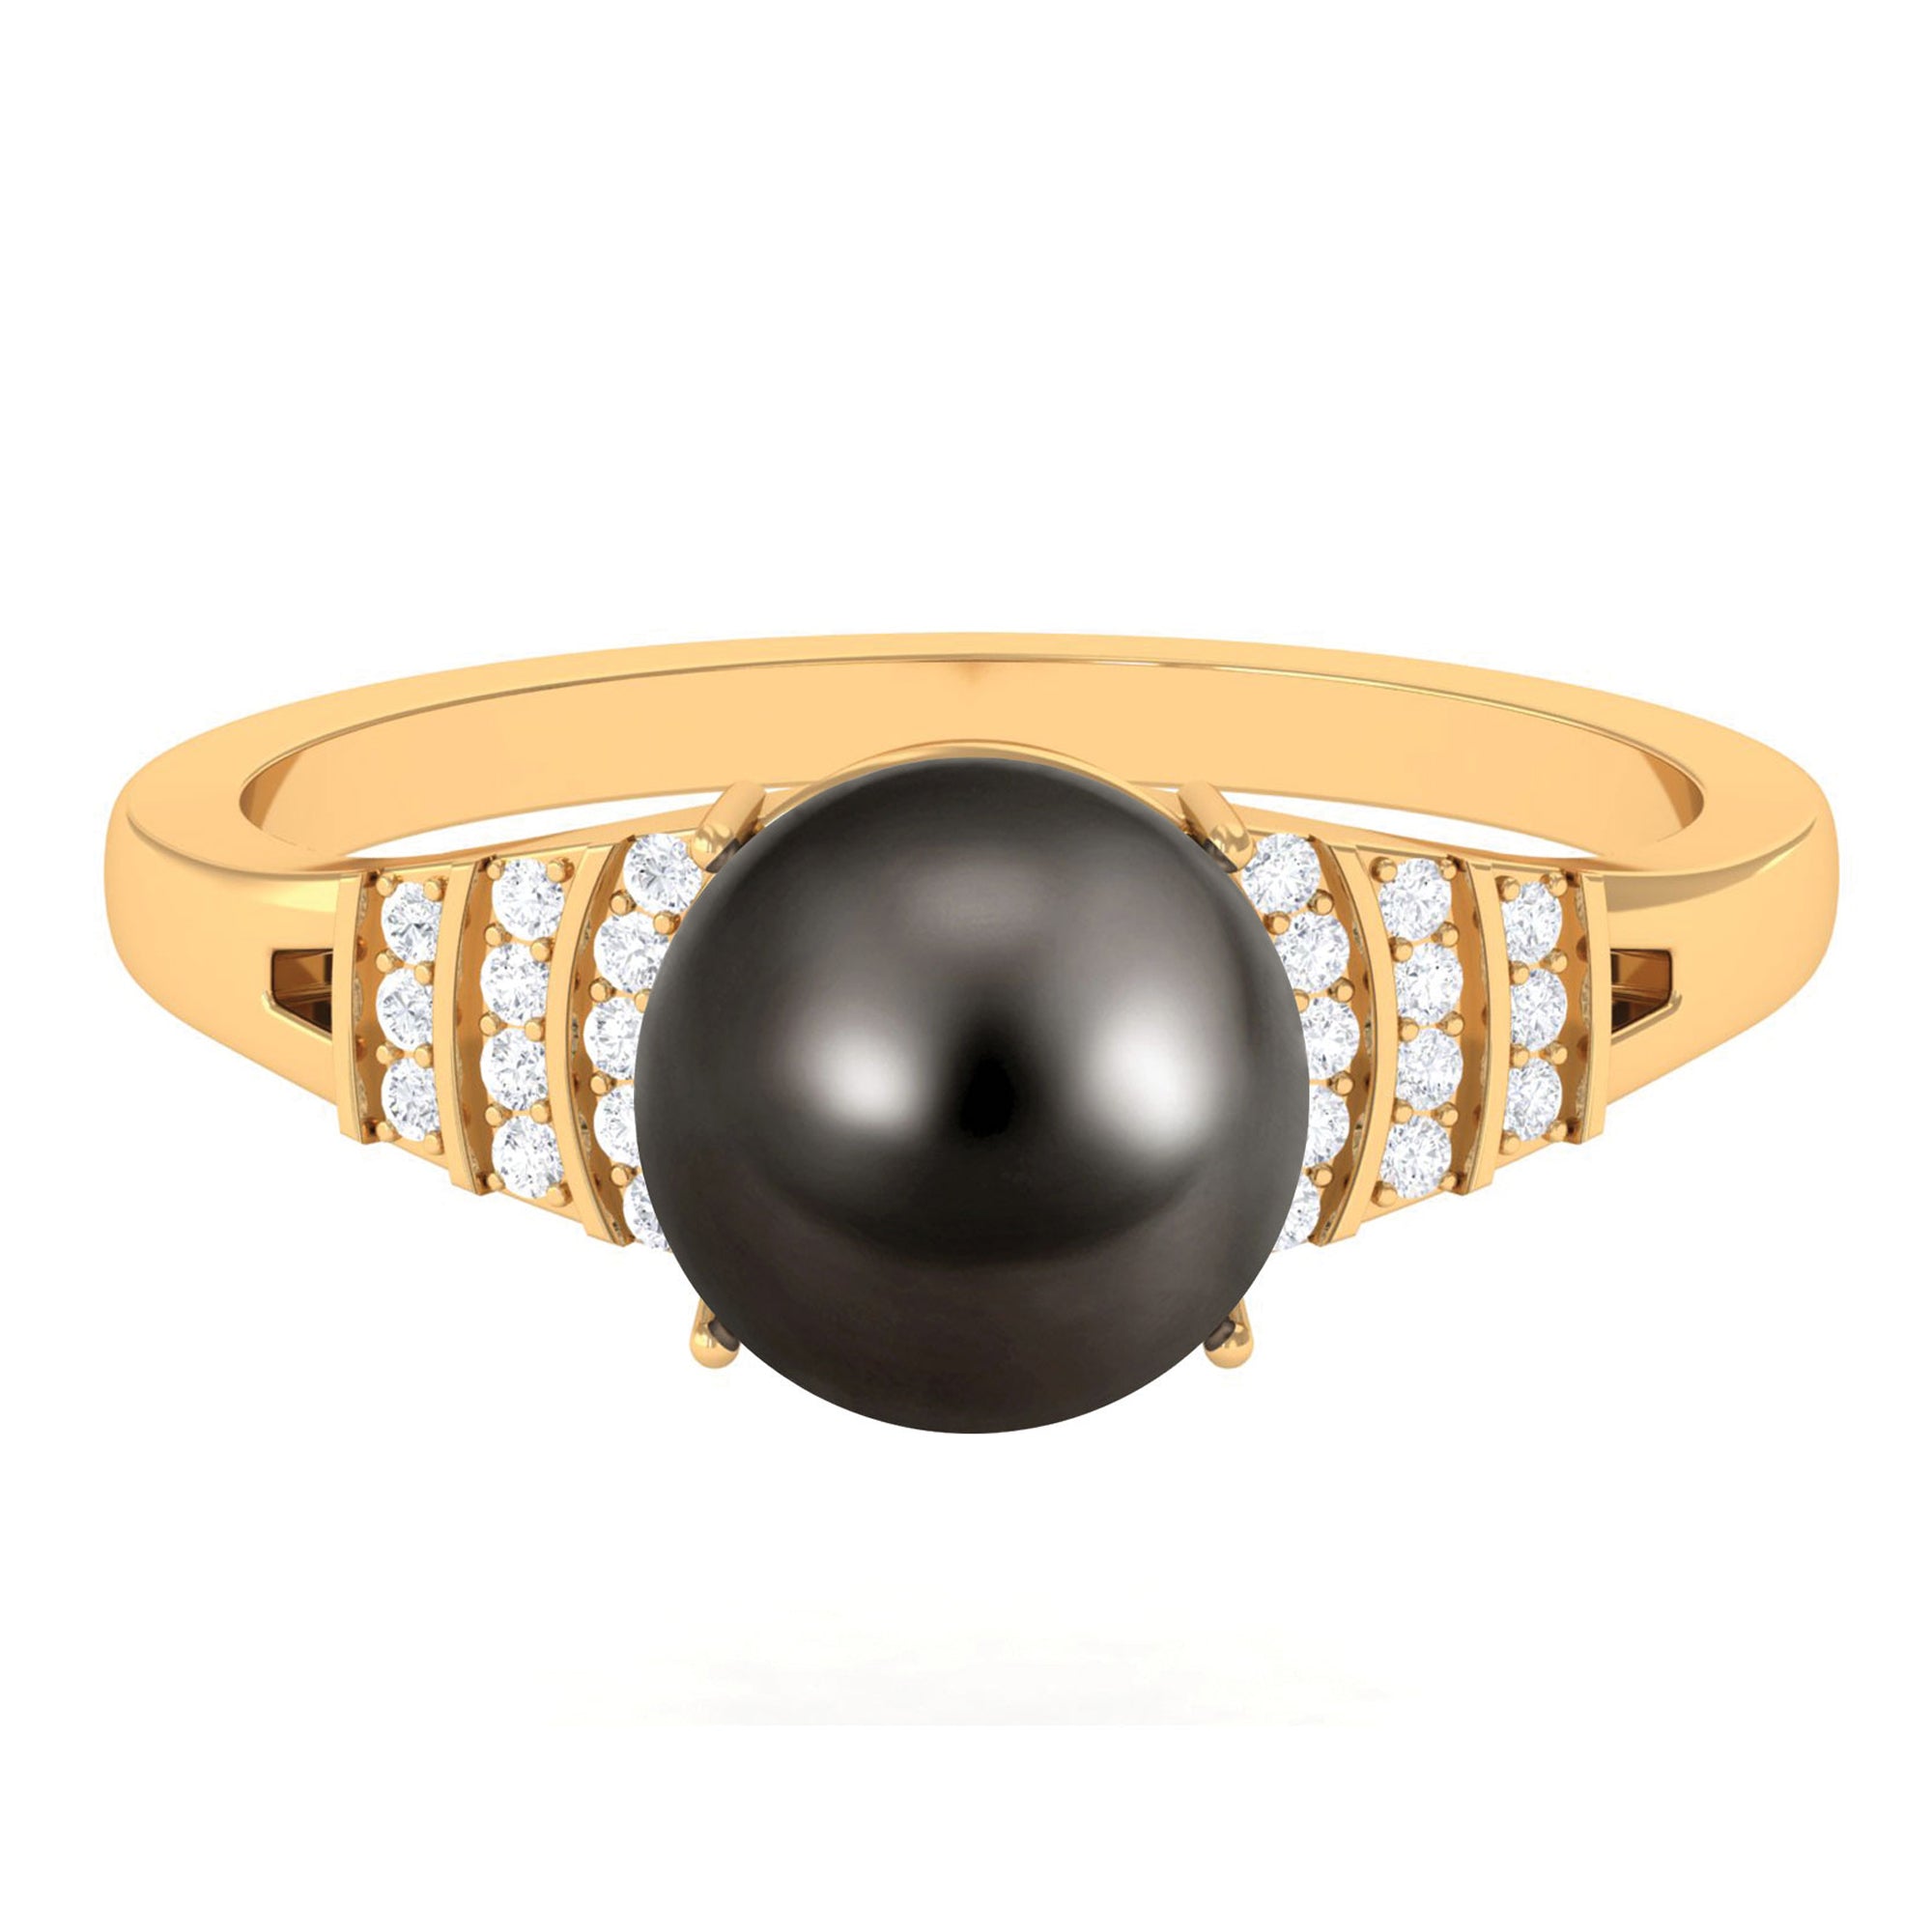 Vintage Inspired Black Pearl Solitaire Ring with Diamond Tahitian pearl-AAA Quality - Arisha Jewels